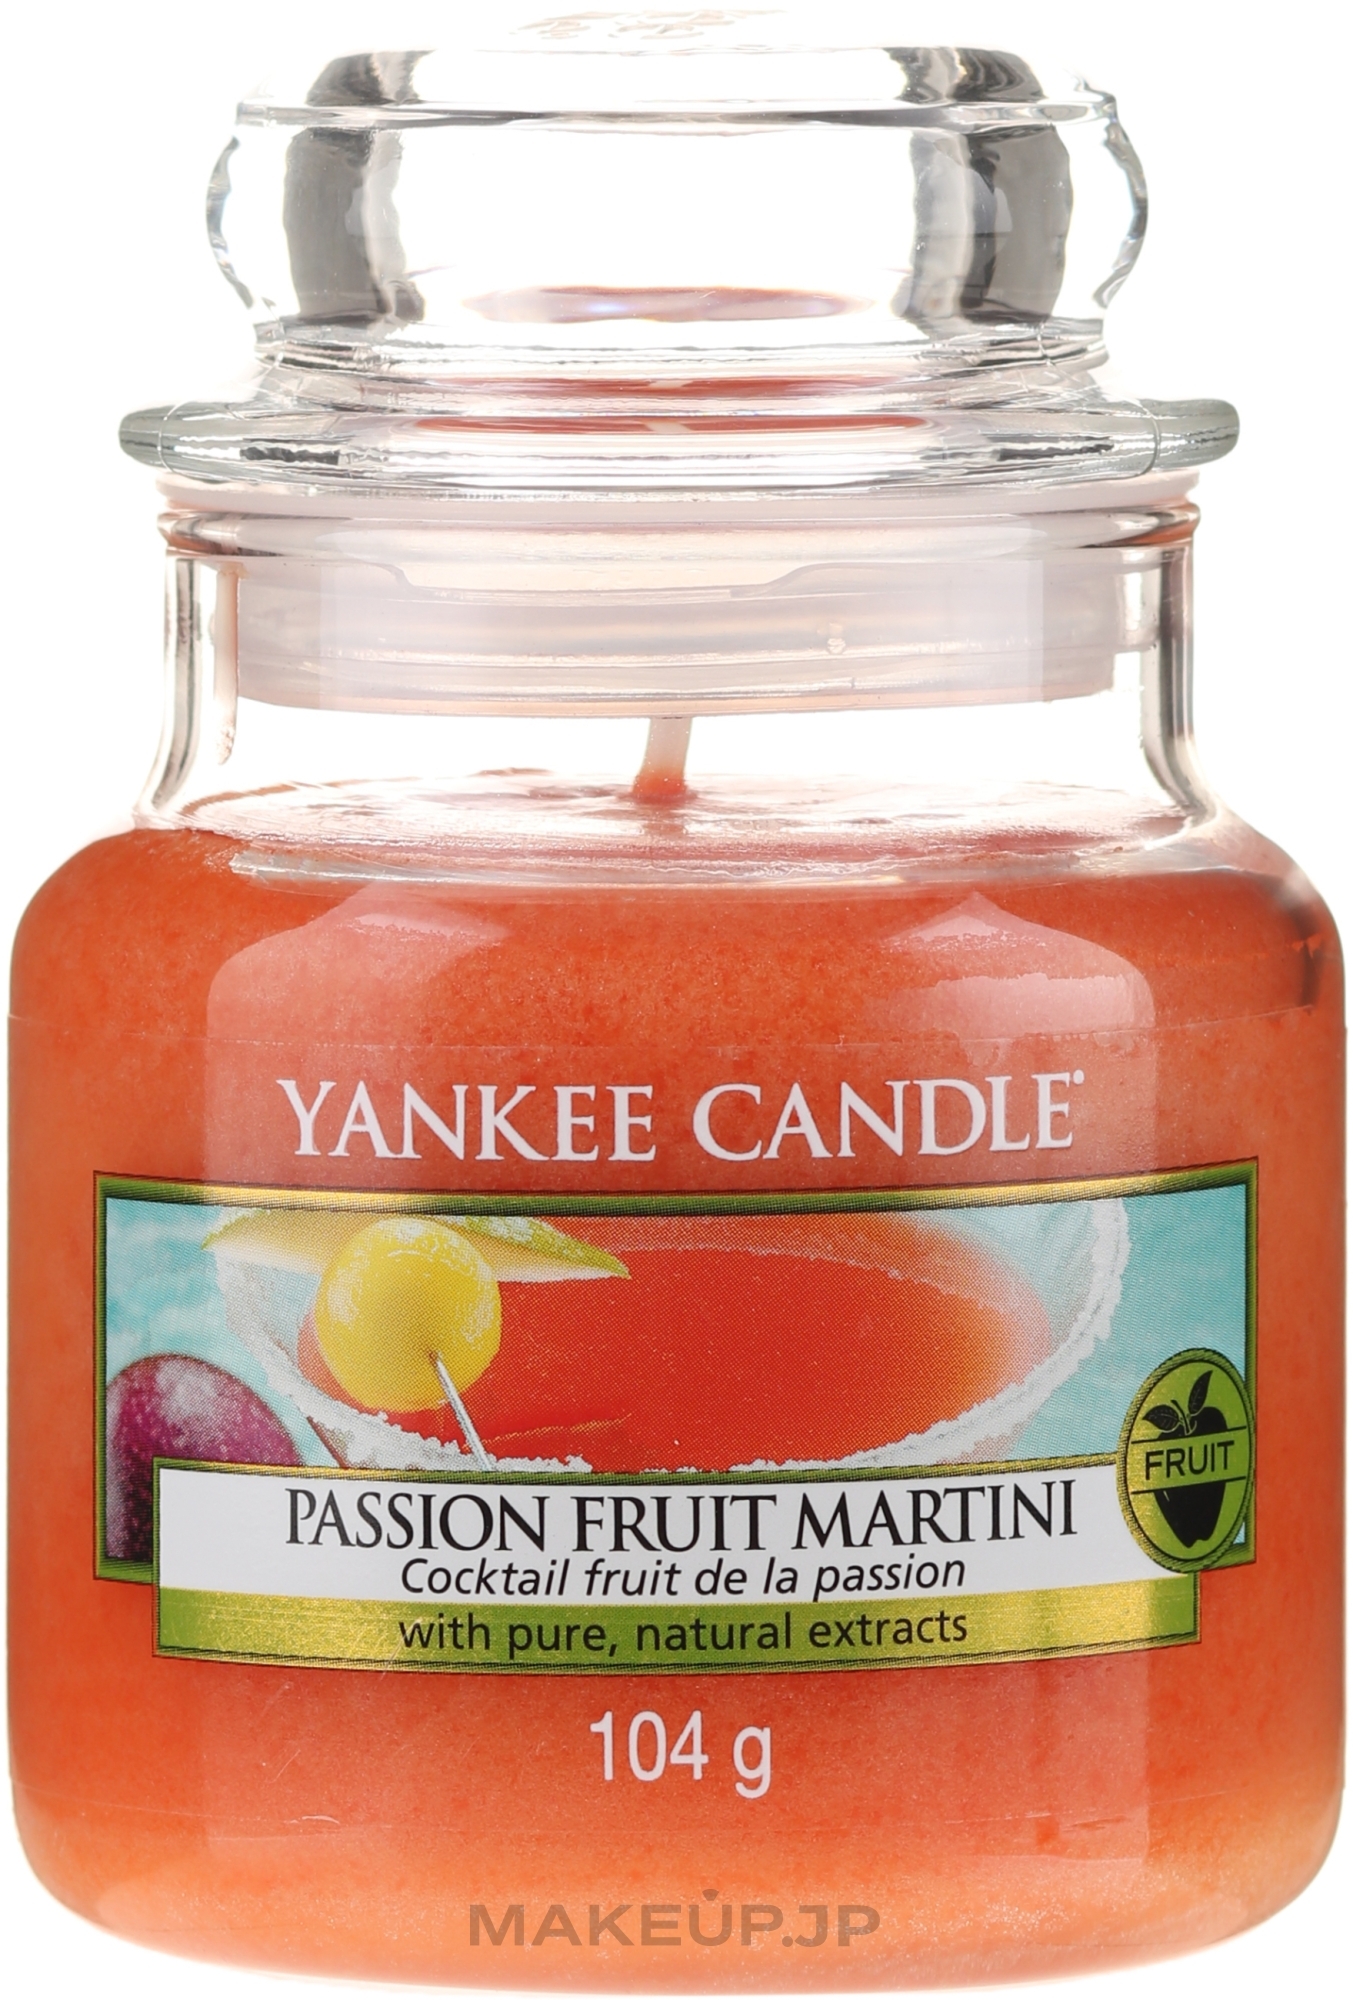 Candle in Glass Jar - Yankee Candle Passion Fruit Martini — photo 104 g